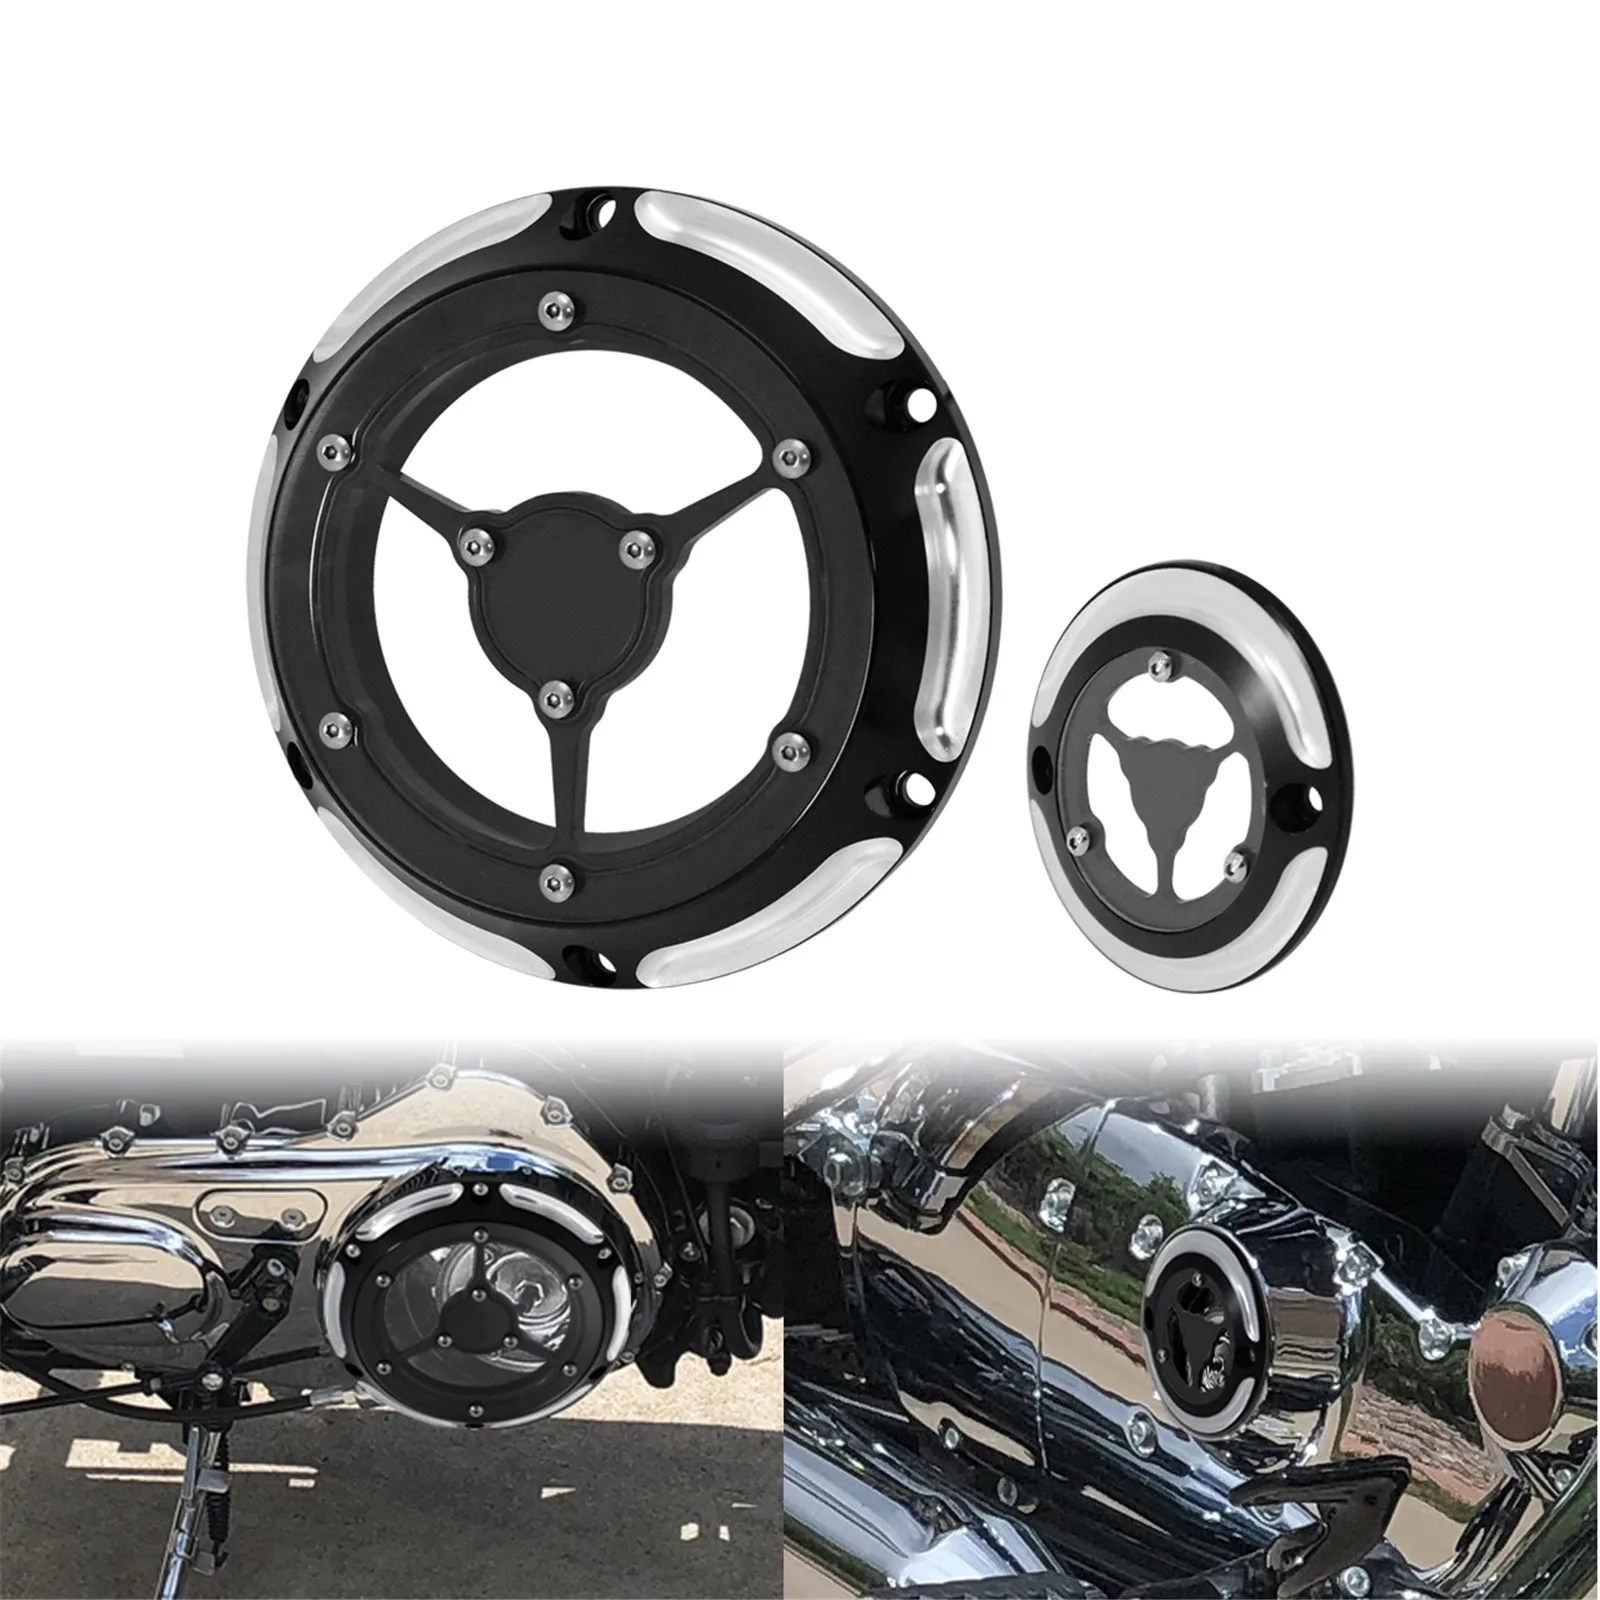 Motorcycle CNC Derby Cover Timer Timing Cover 6 Holes Set  Harley ter 883 1200 X - £196.72 GBP